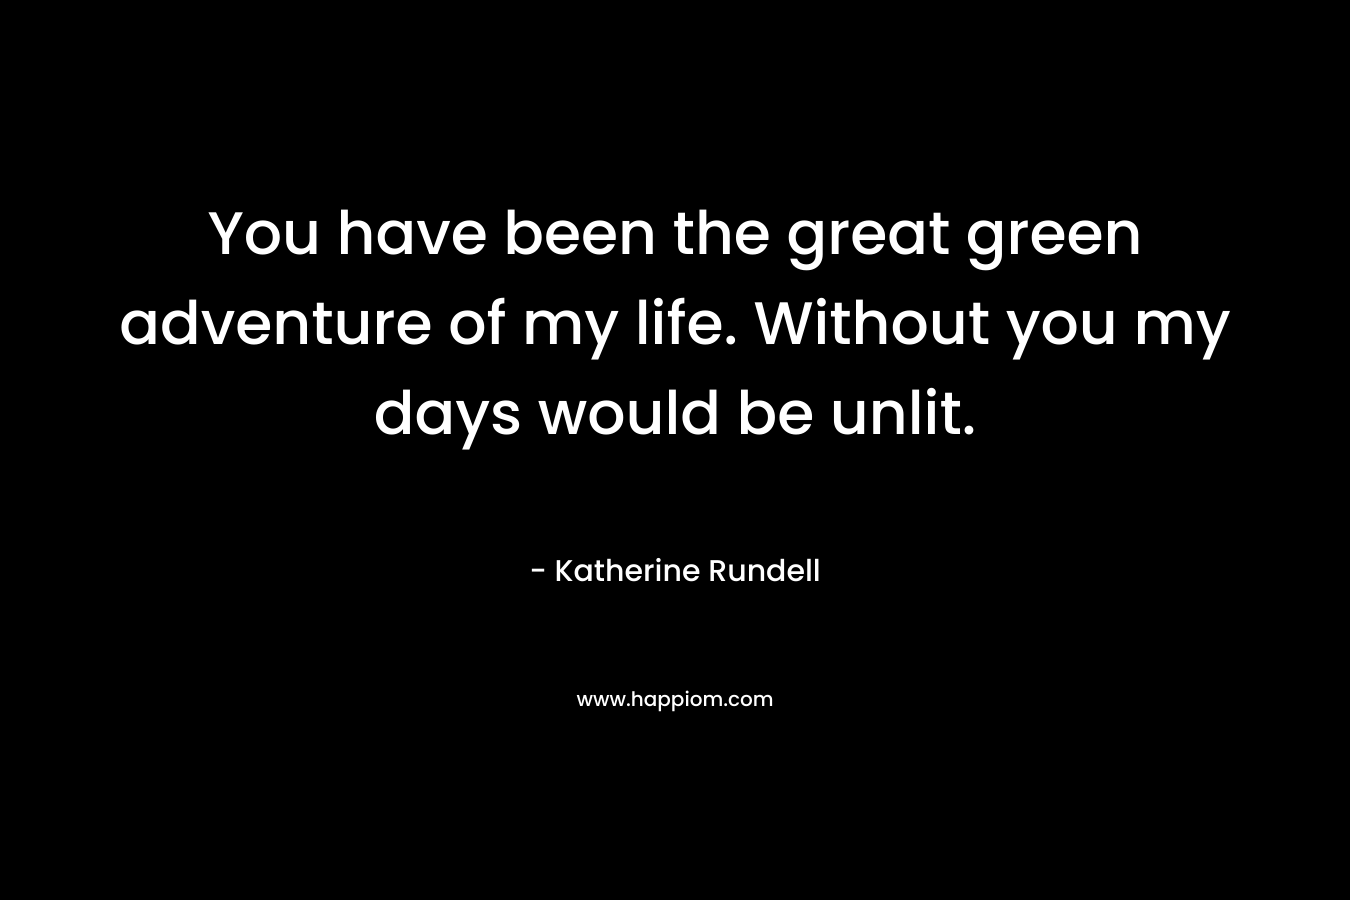 You have been the great green adventure of my life. Without you my days would be unlit.